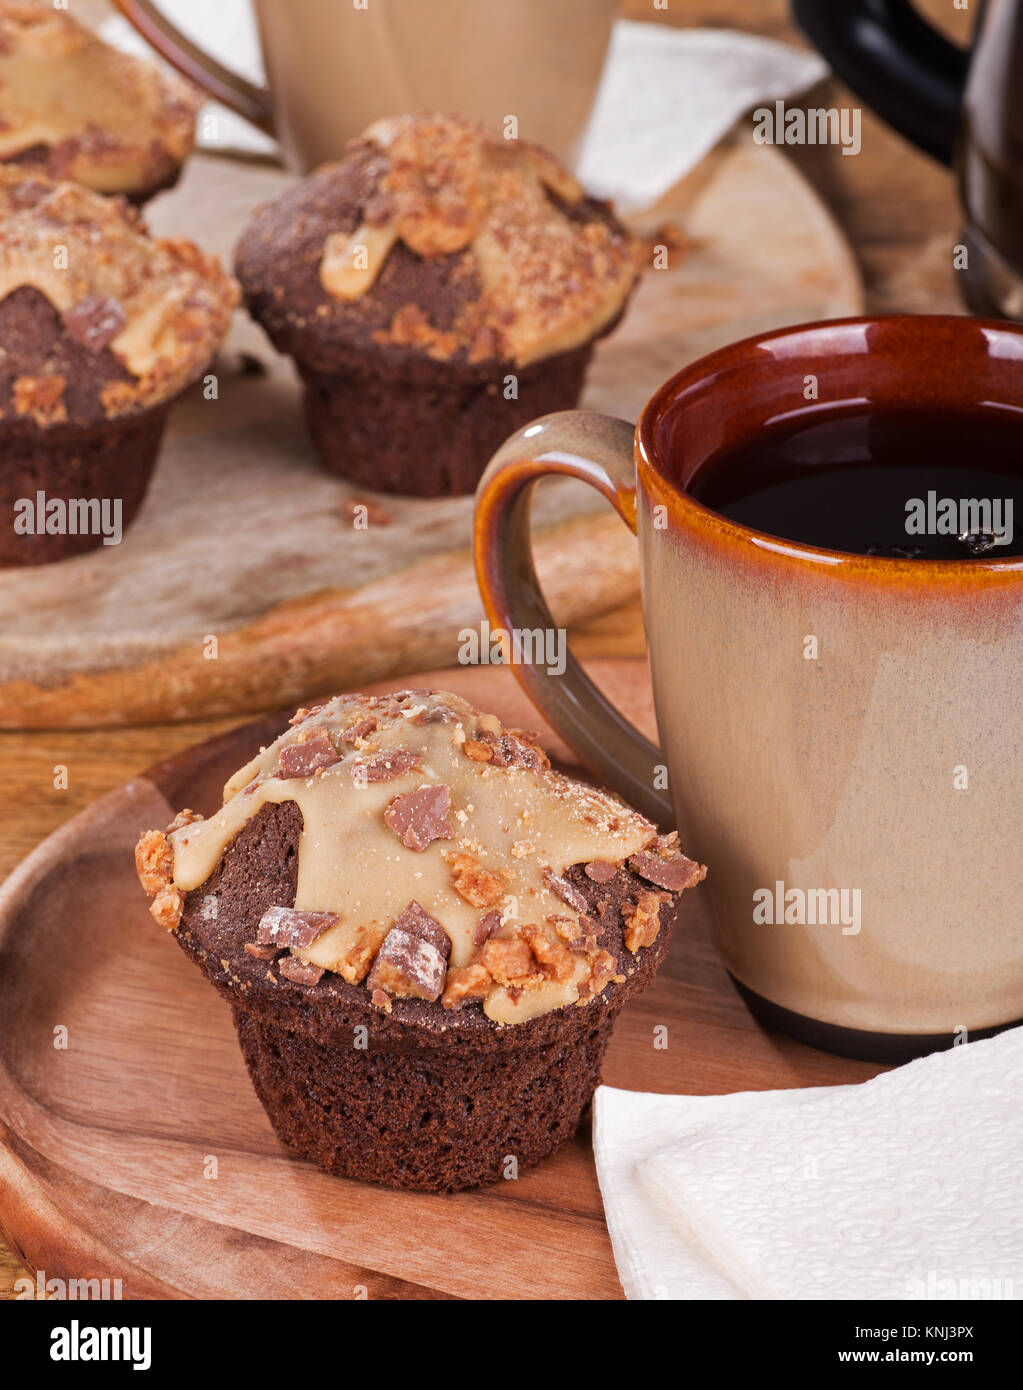 Chocolate cupcakes with peanut butter icing and chips and cup of coffee Stock Photo